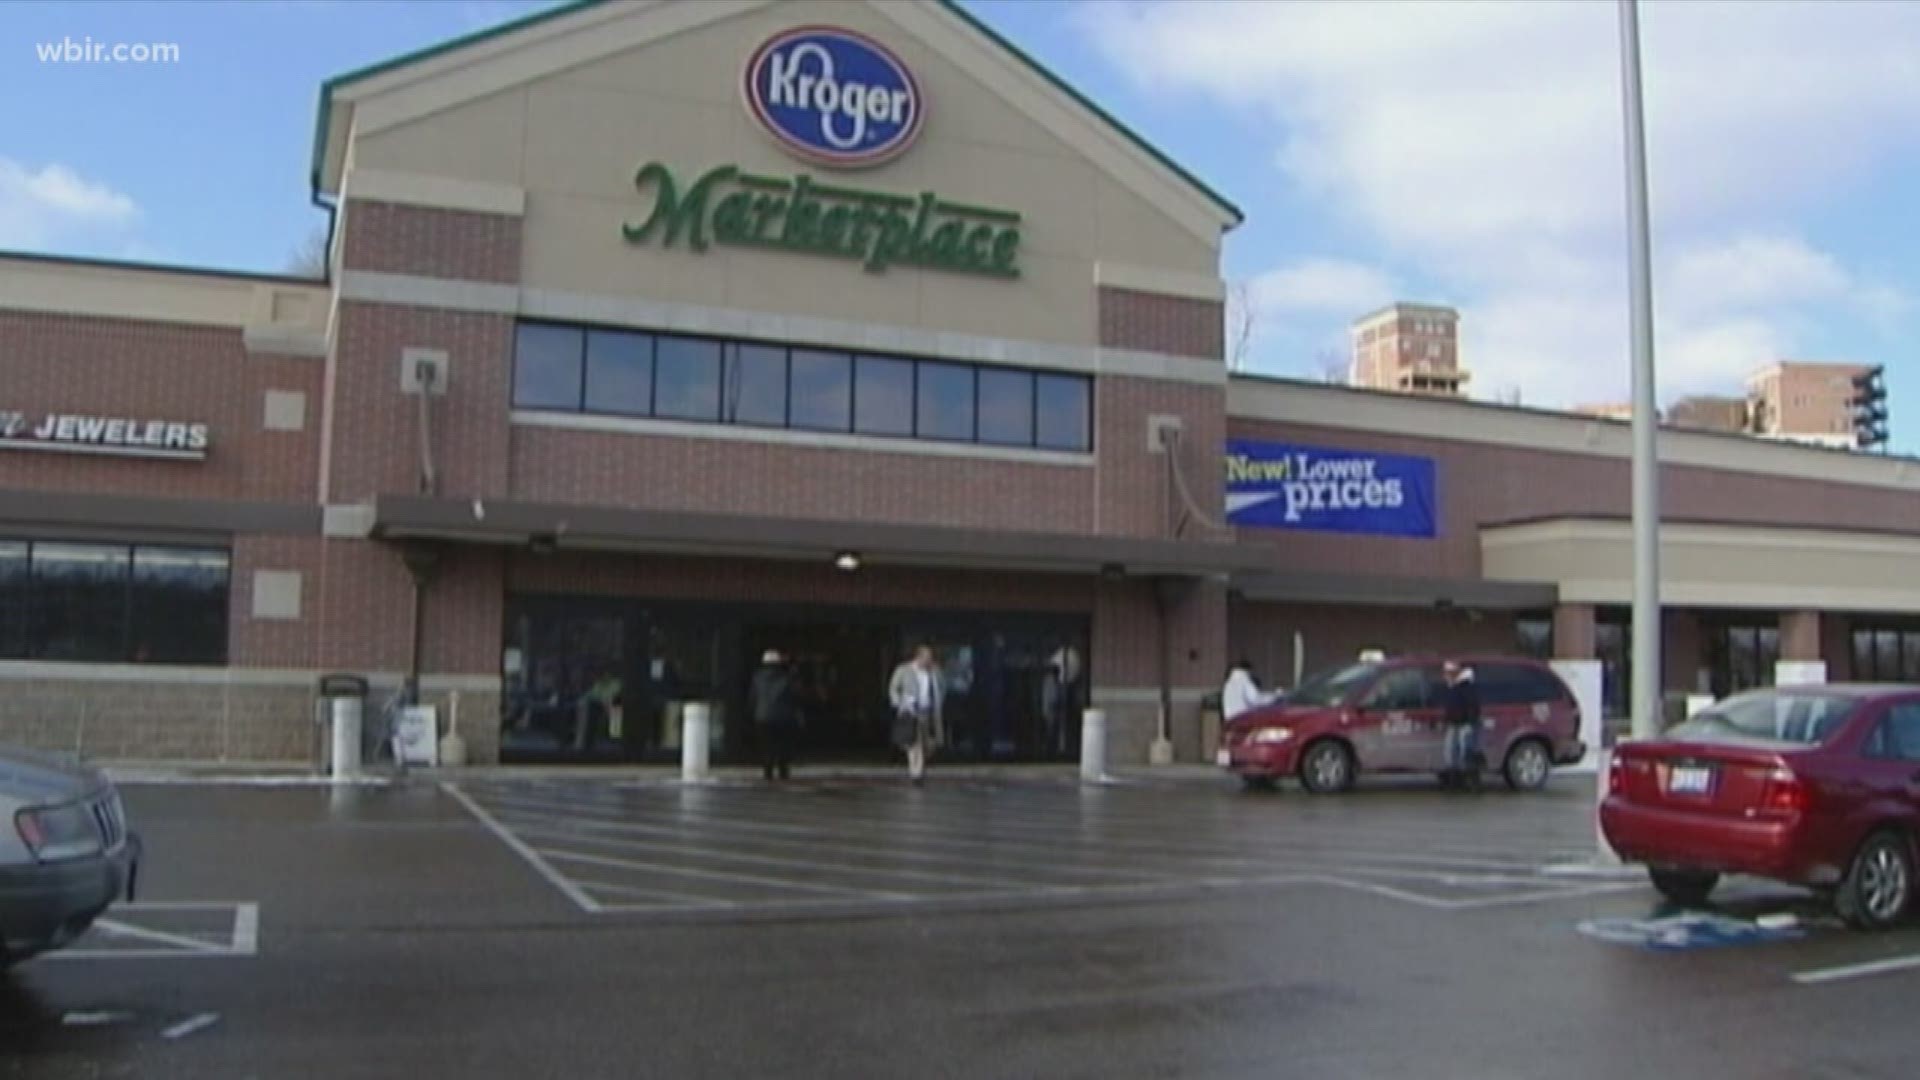 Kroger said it will soon sell hemp-derived topical CBD products in Tennessee, Kentucky and other states.